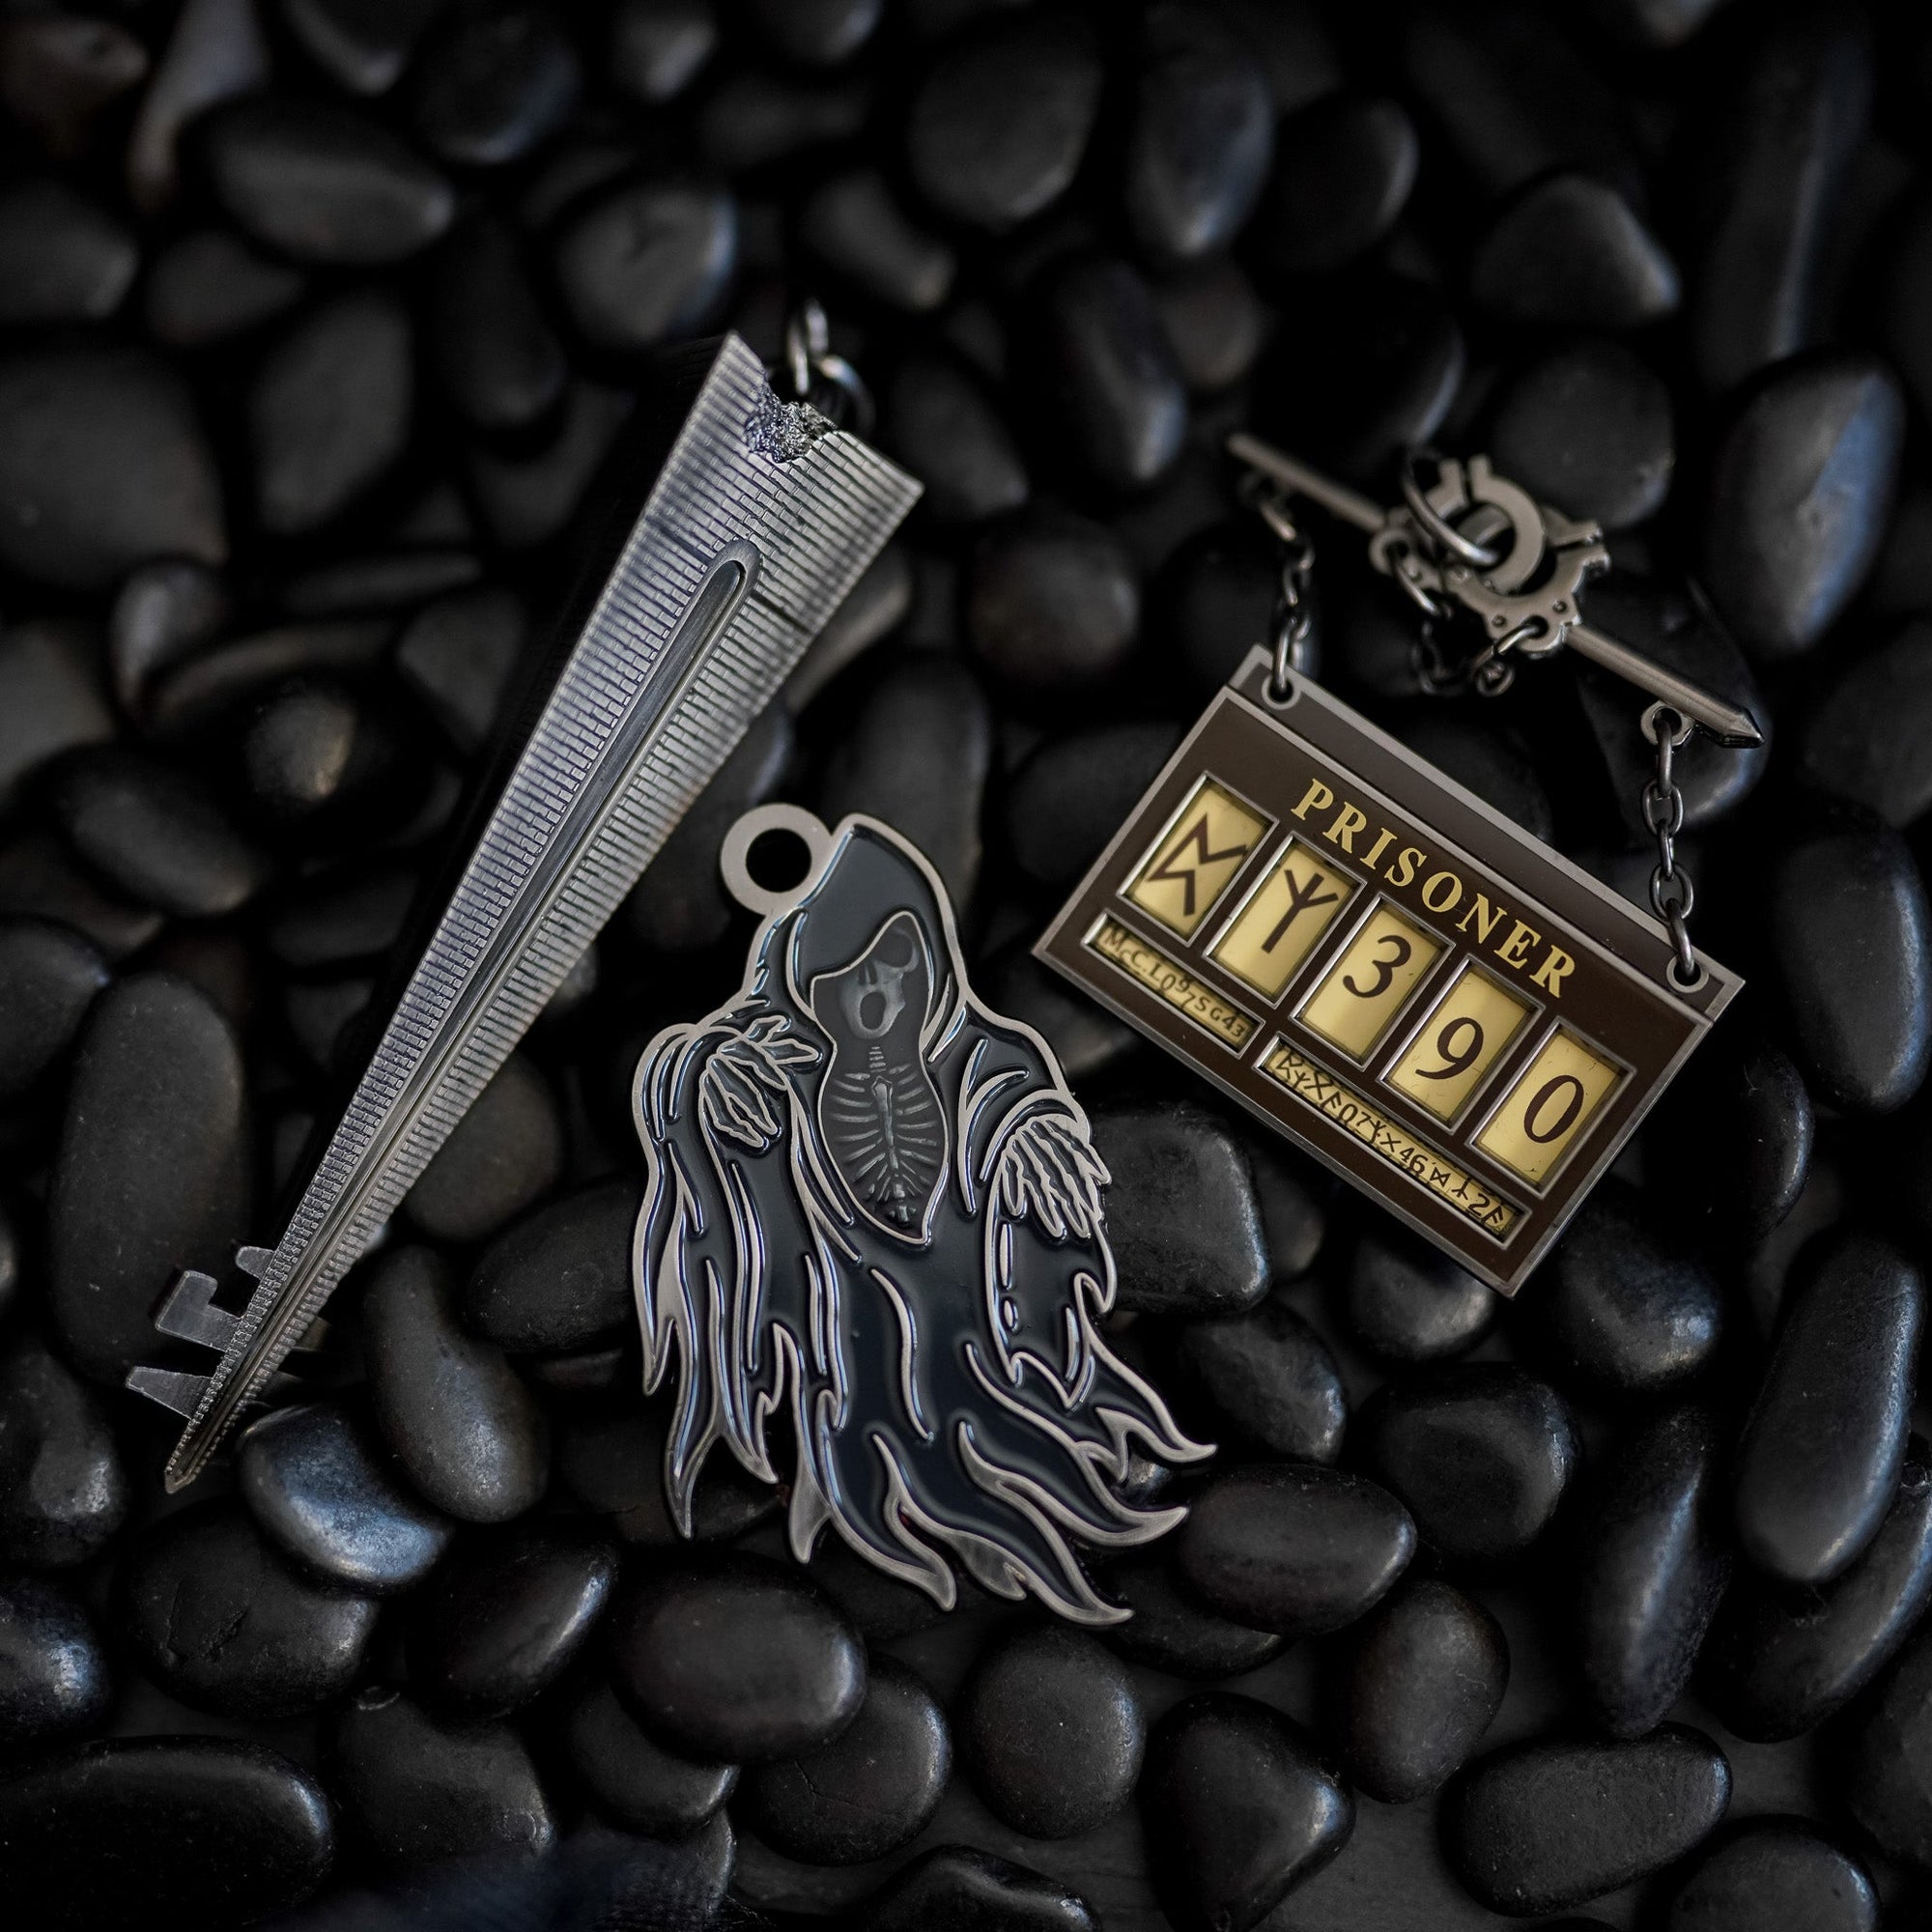 Wizard Prison Collectible Key #18 from LitJoy Crate | Collectibles & Gifts for Booklovers